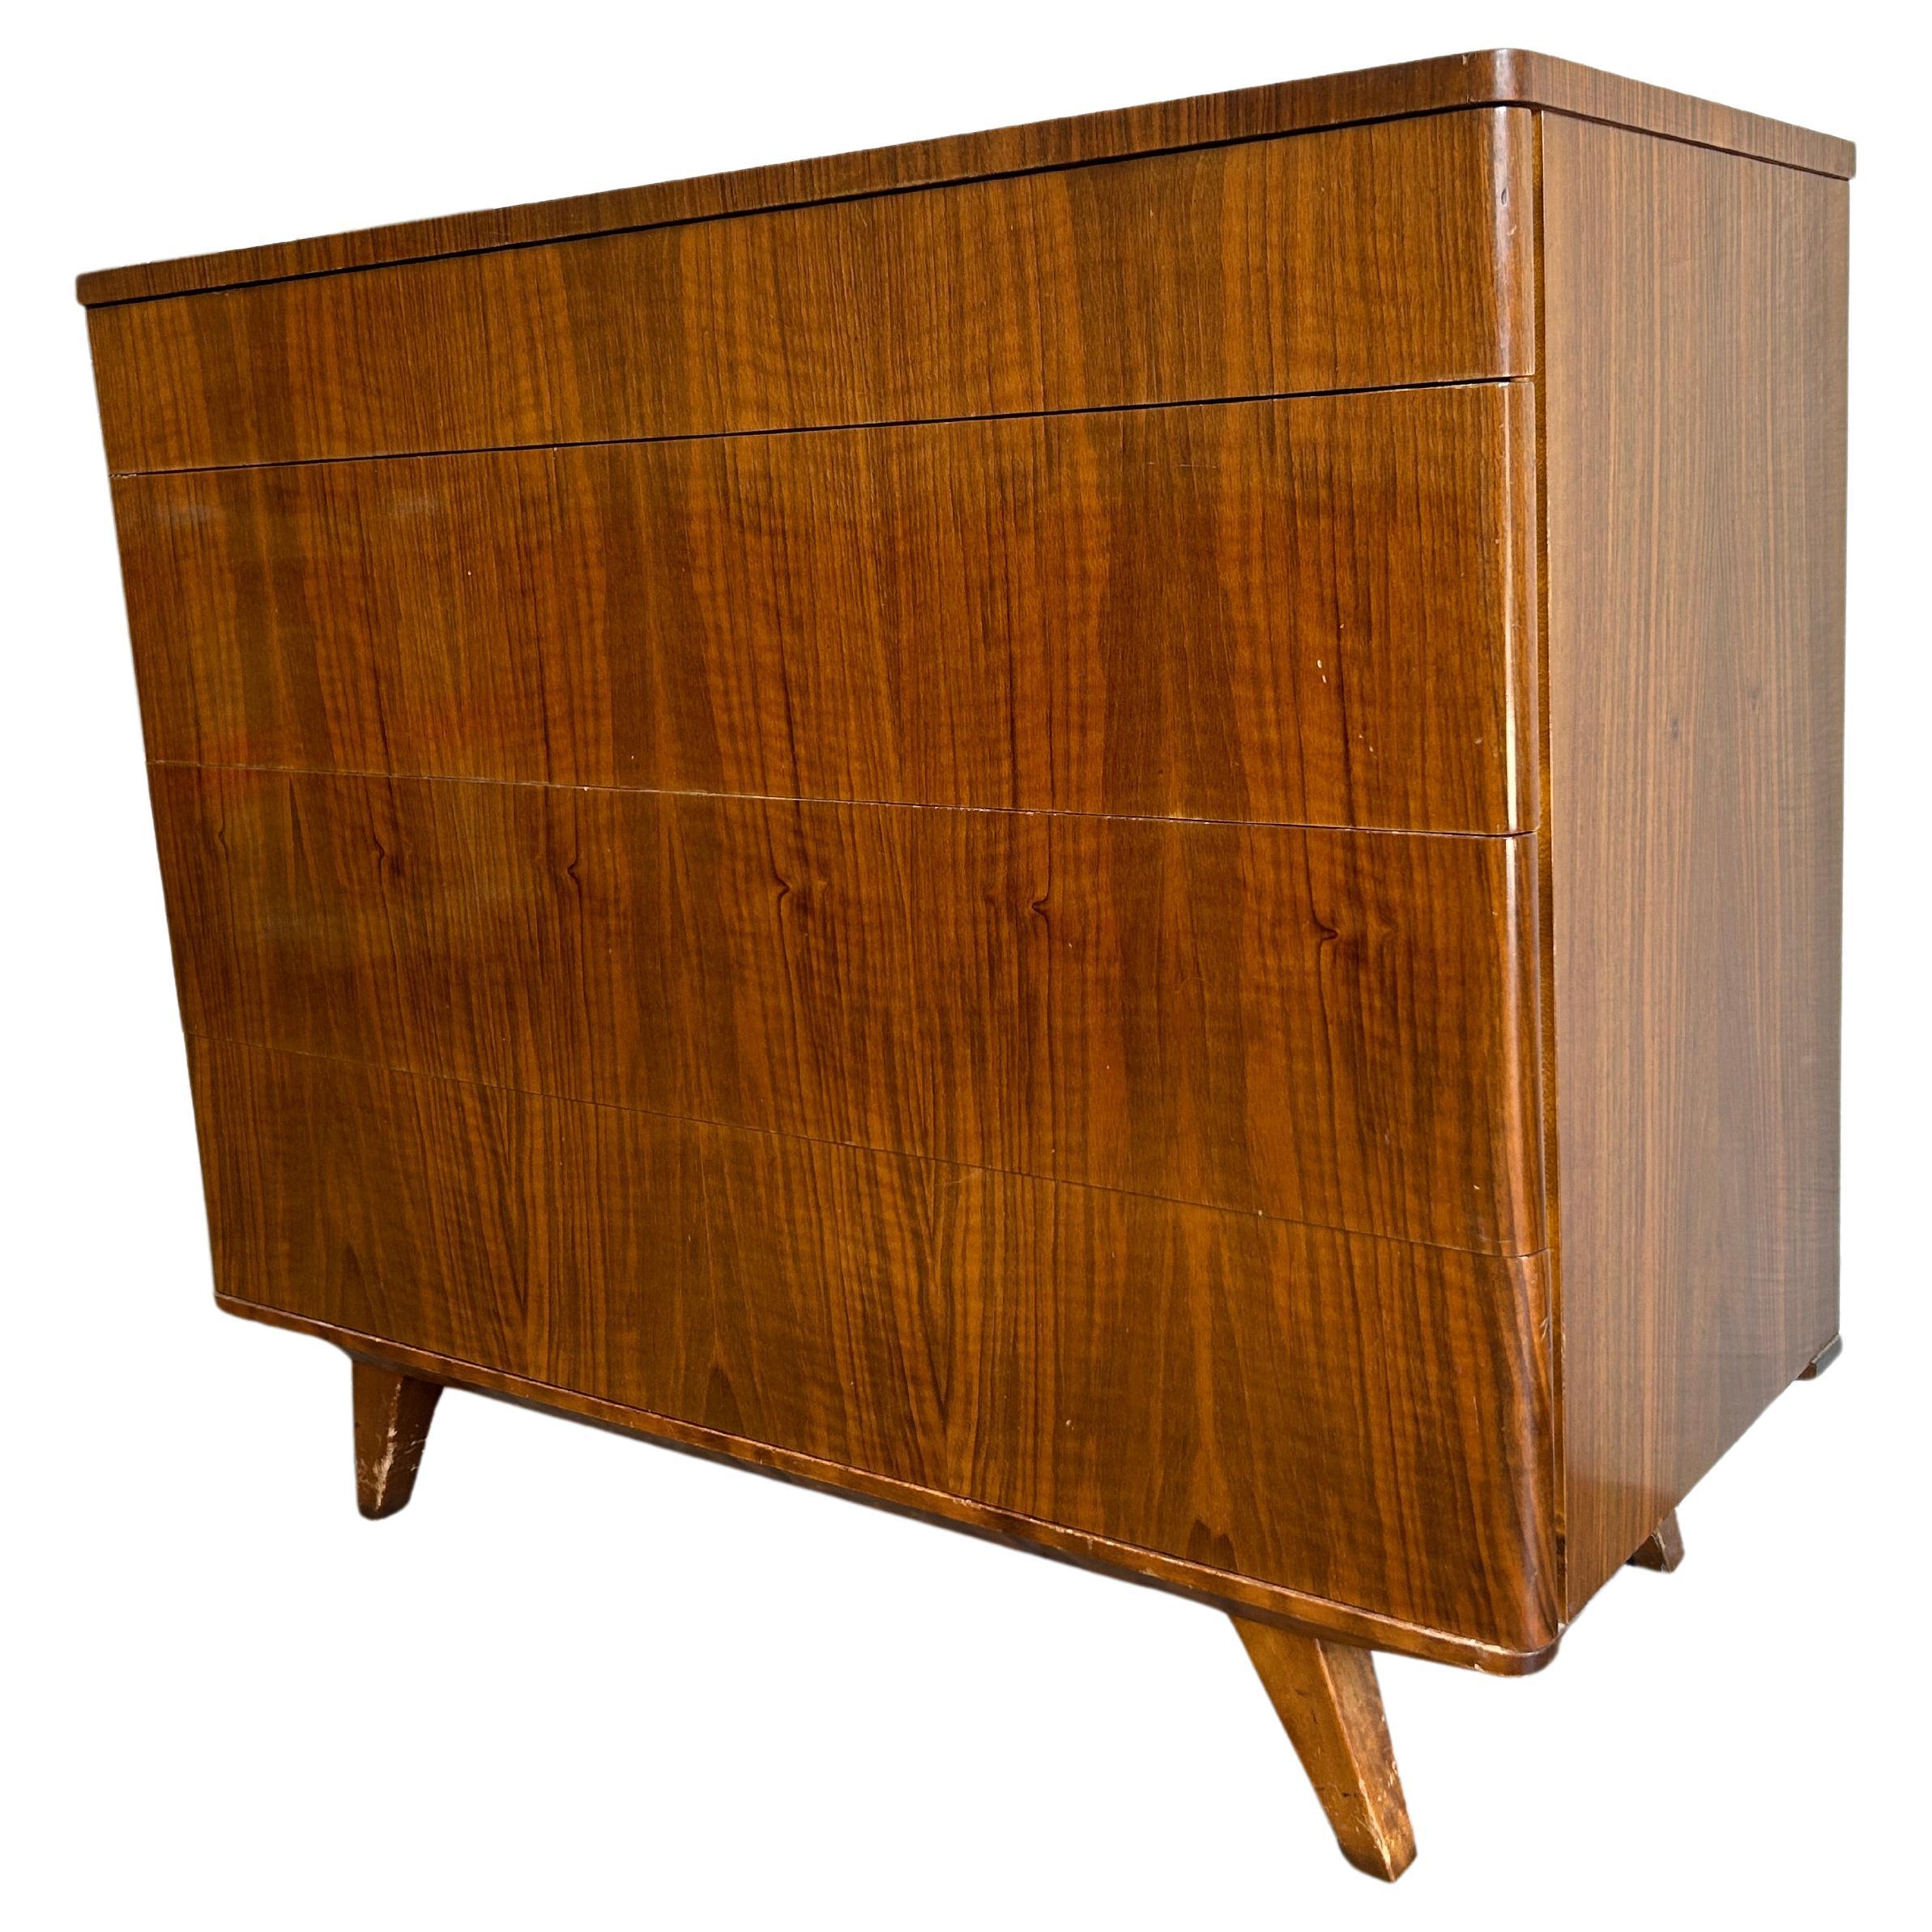 Stunning early deco mid century 4 drawer teak veneer dresser made in Sweden. Beautiful early deco style mid century dresser. Beautiful blonde birch wood drawer construction all clean and slide smooth. Great design with a stunning exotic teak veneer